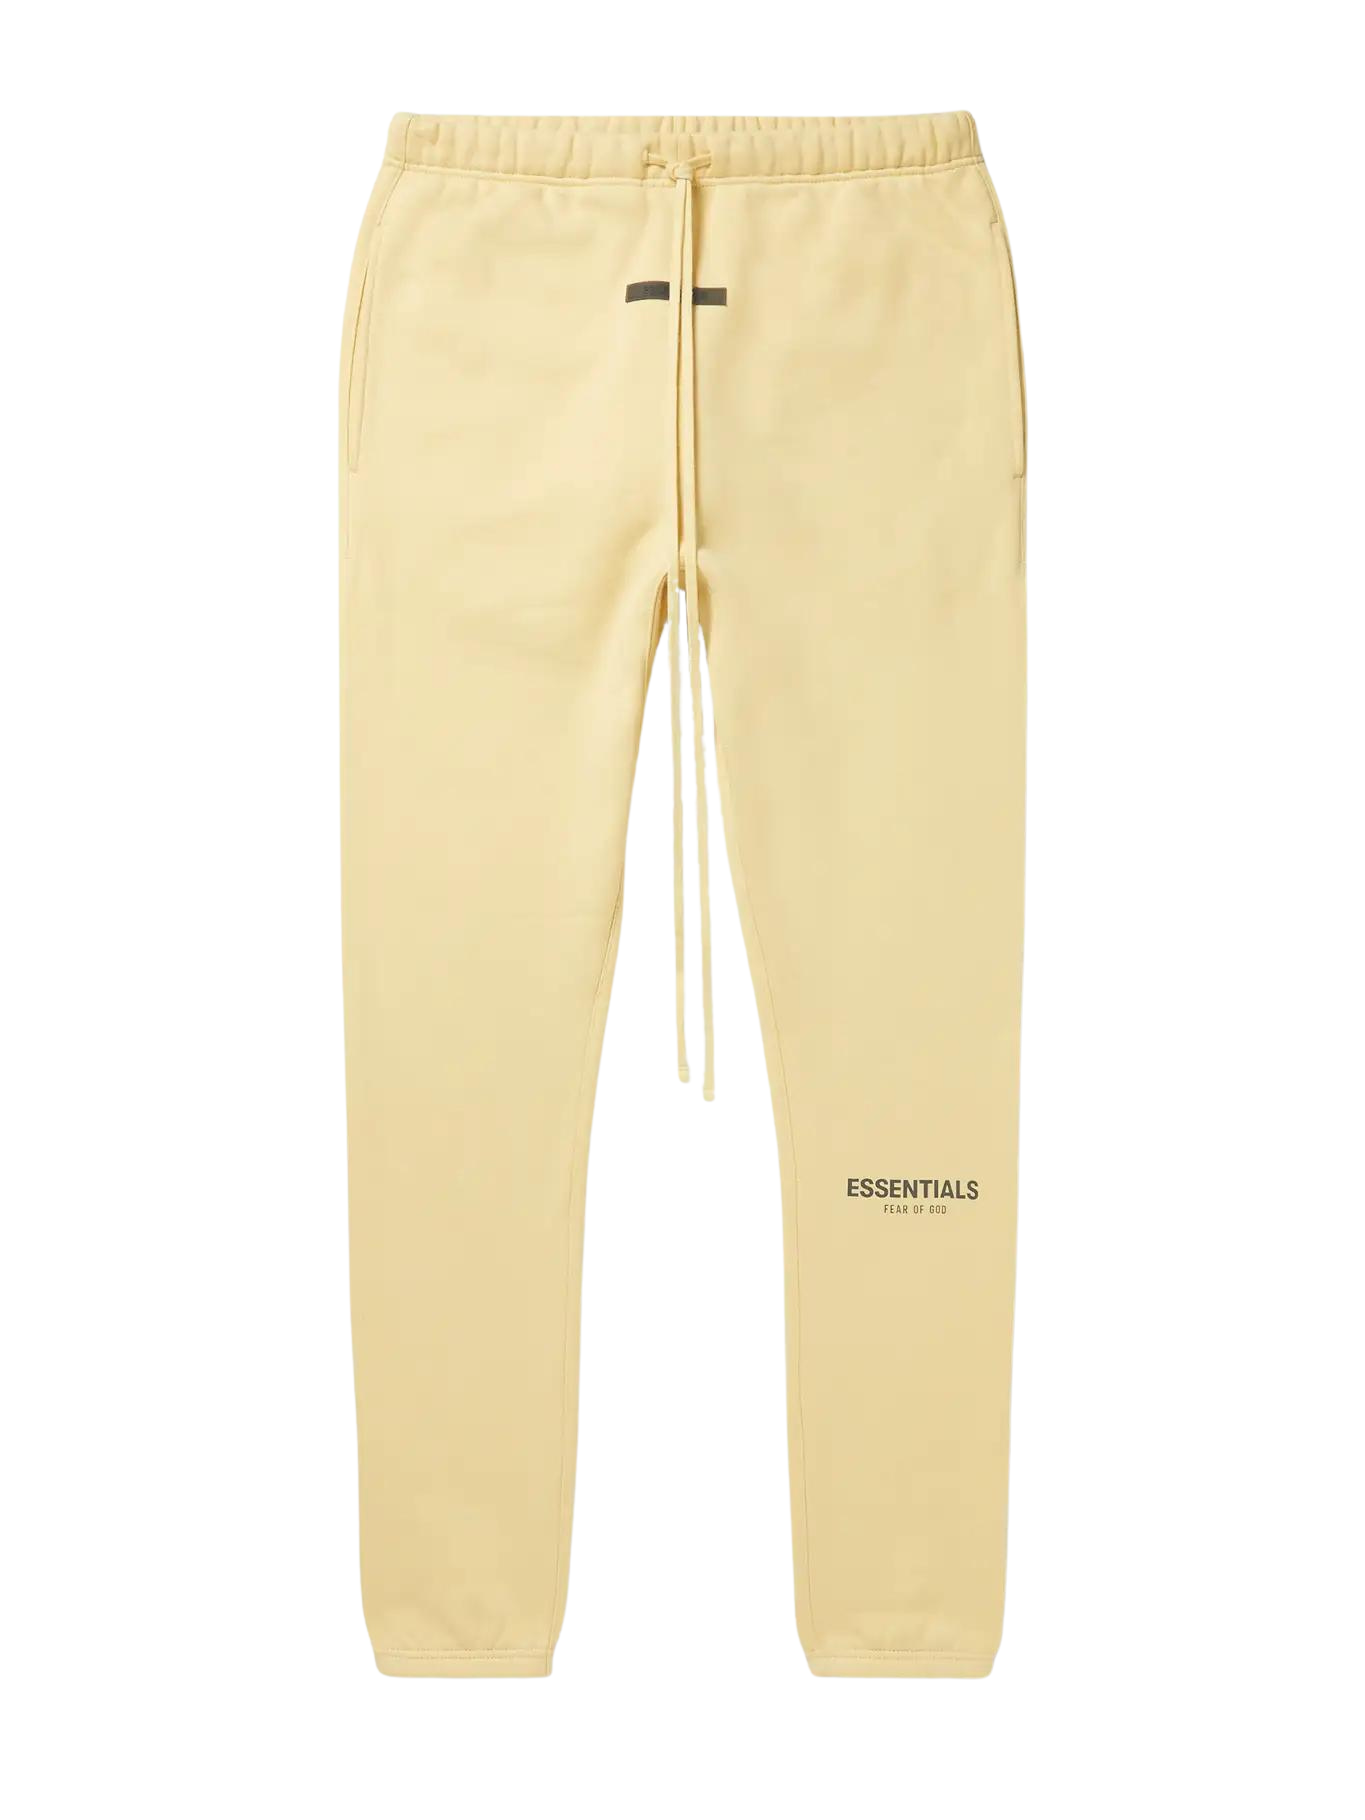 Fear Of God Essentials Cream Core Collection Sweatpants